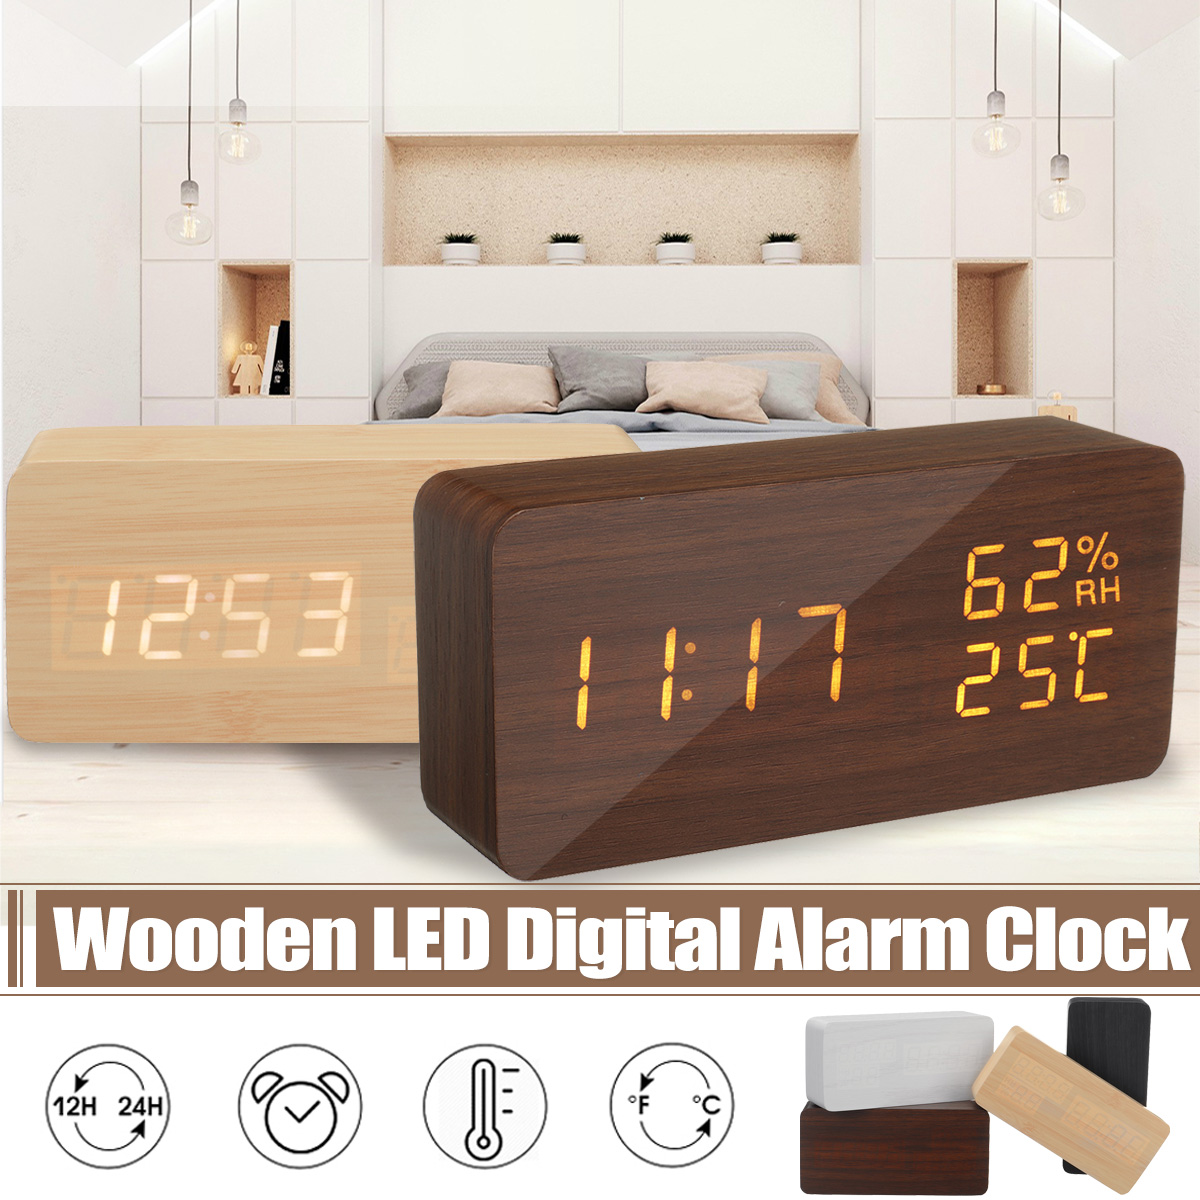 Modern-Wooden-Wood-Digital-Thermometer-USB-Charger-LED-Desk-Alarm-Wireless-Clock-1739446-2